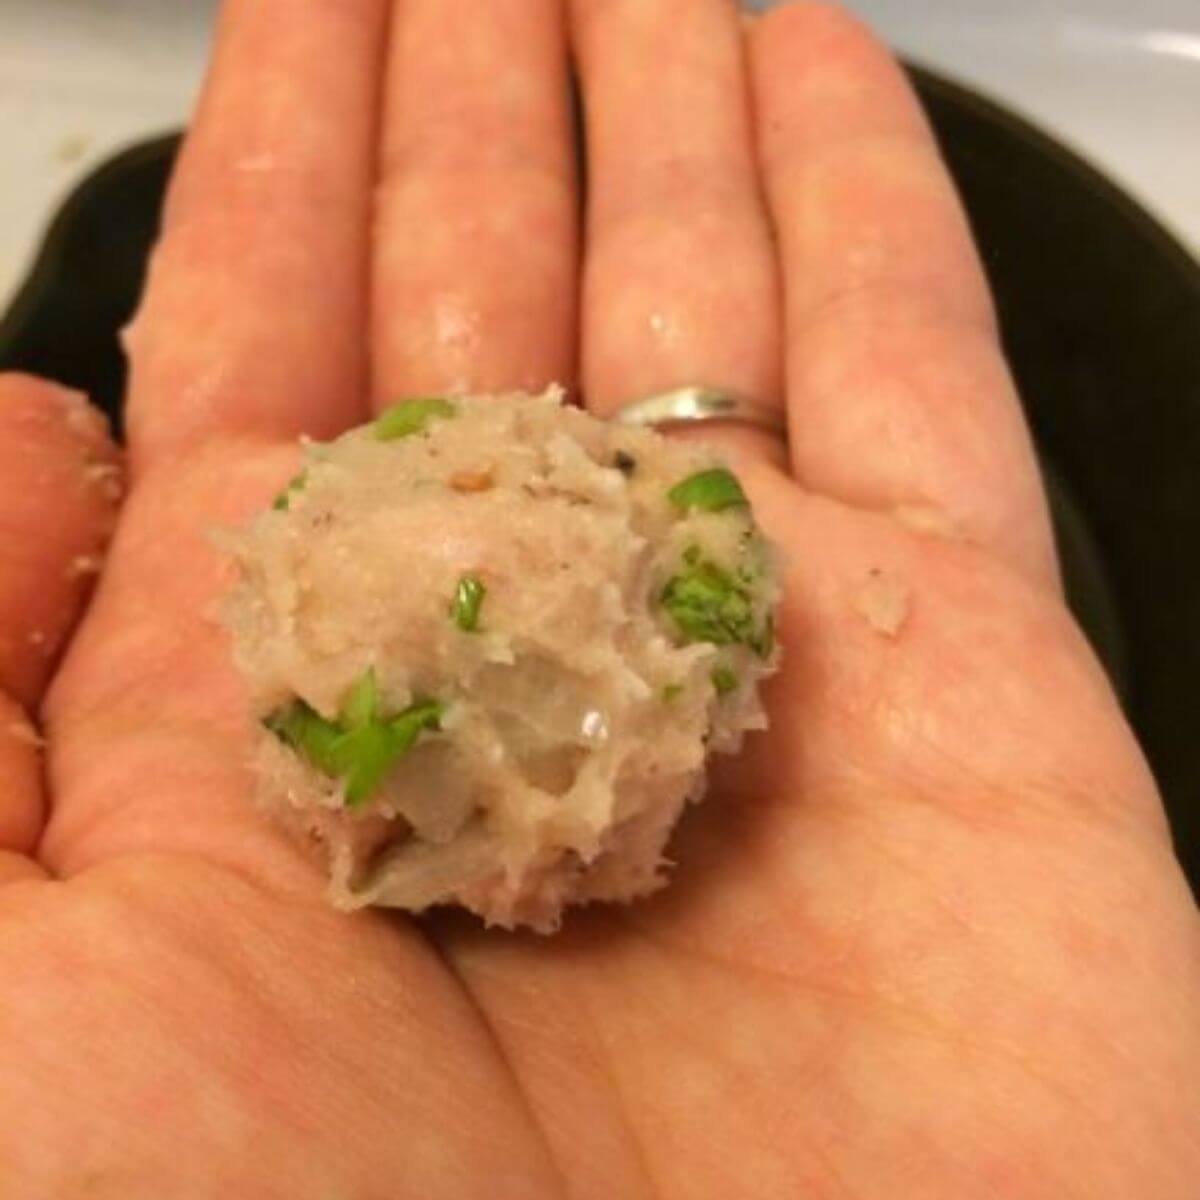 uncooked turkey meatball in palm of hand